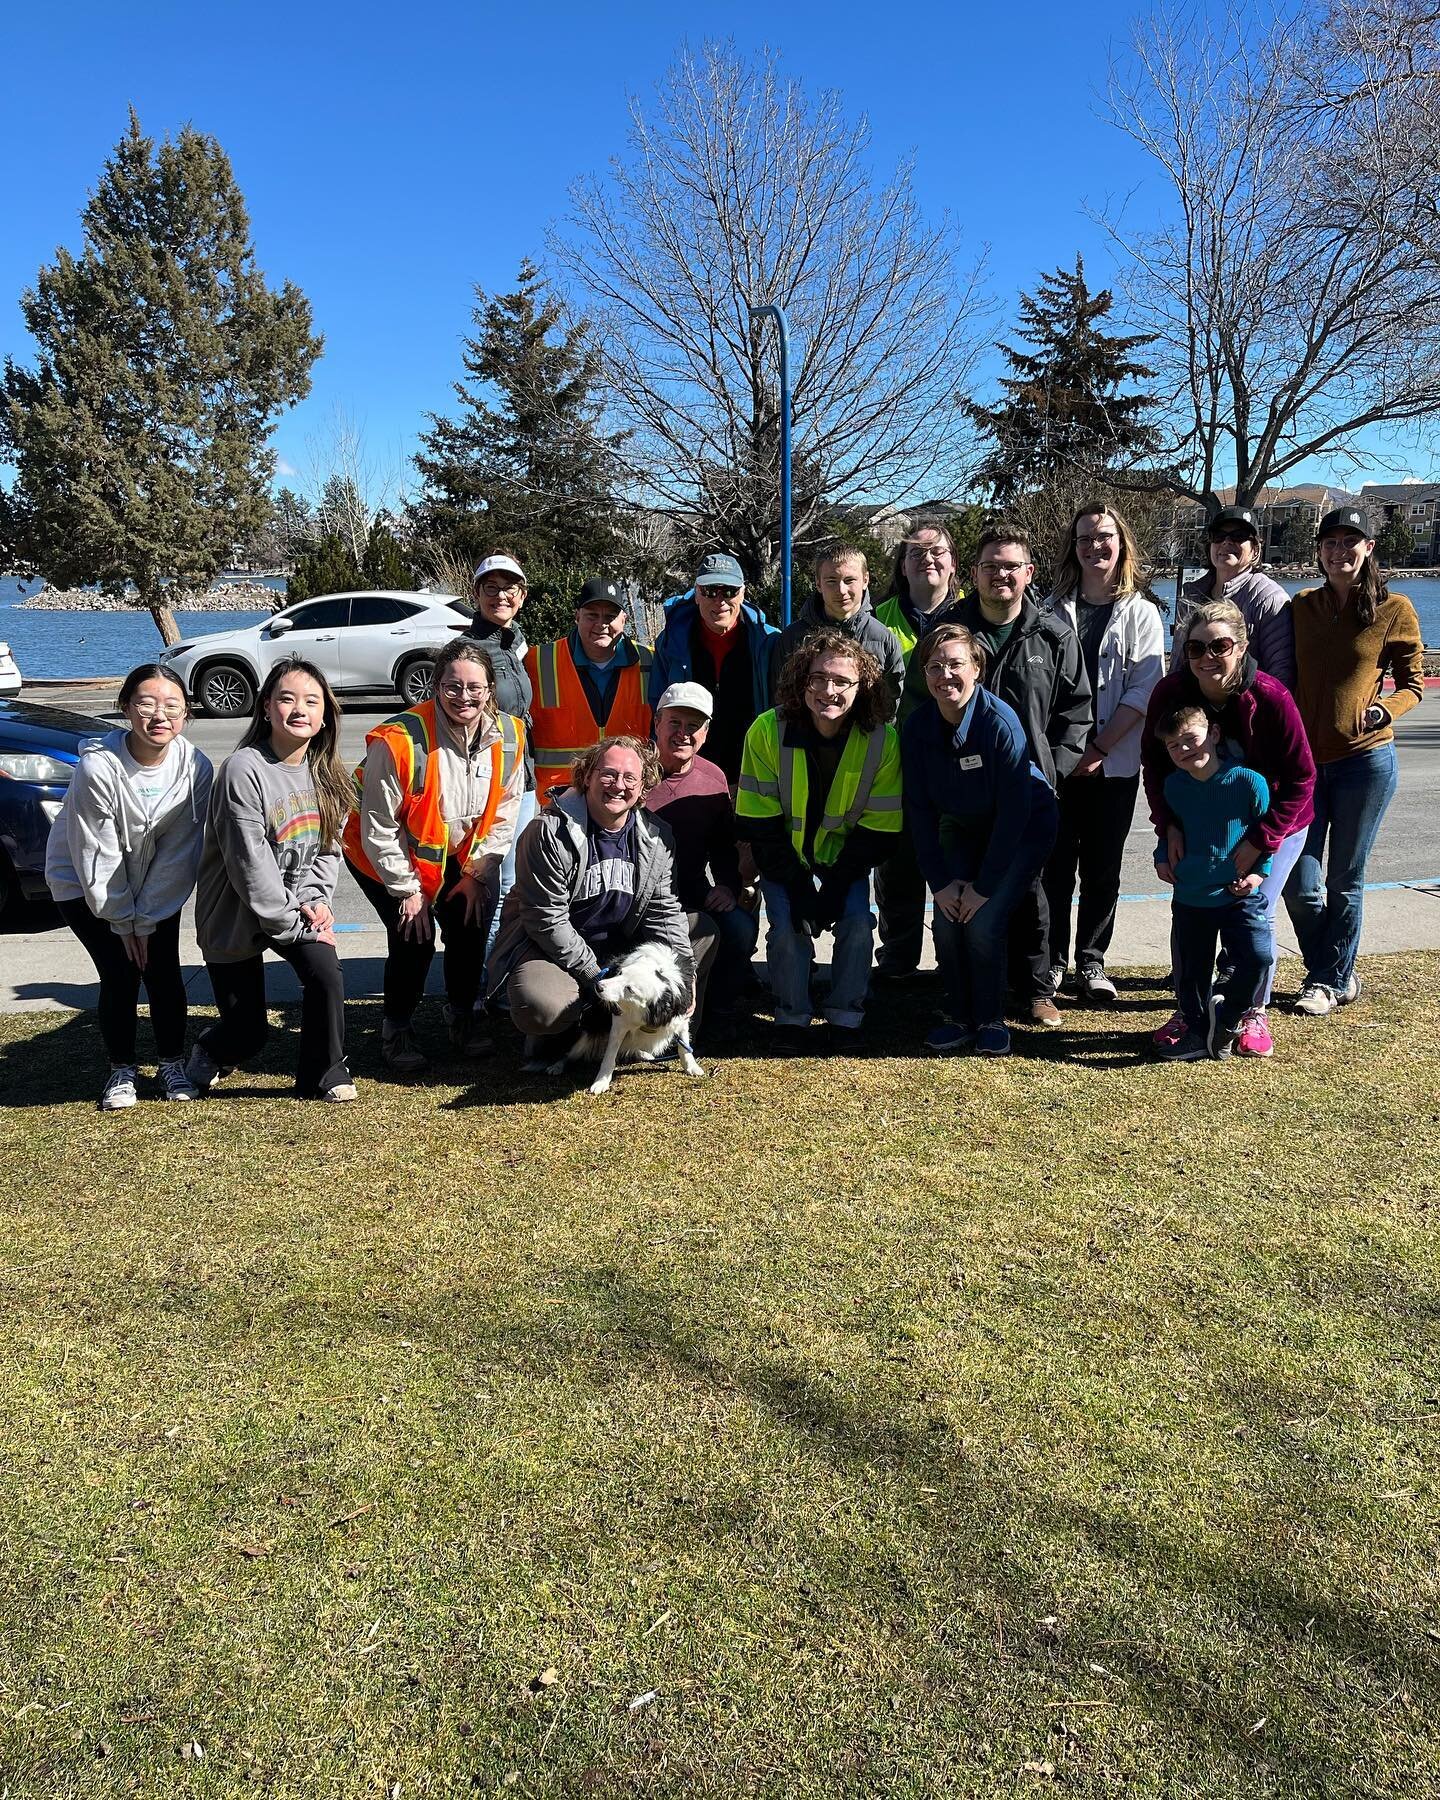 What a wonderful morning spent in the Reno Community! The Reno Phil spent the morning picking up trash at Virginia Lake. Thank you to all who joined us and to @ktmbeautiful for this wonderful opportunity.